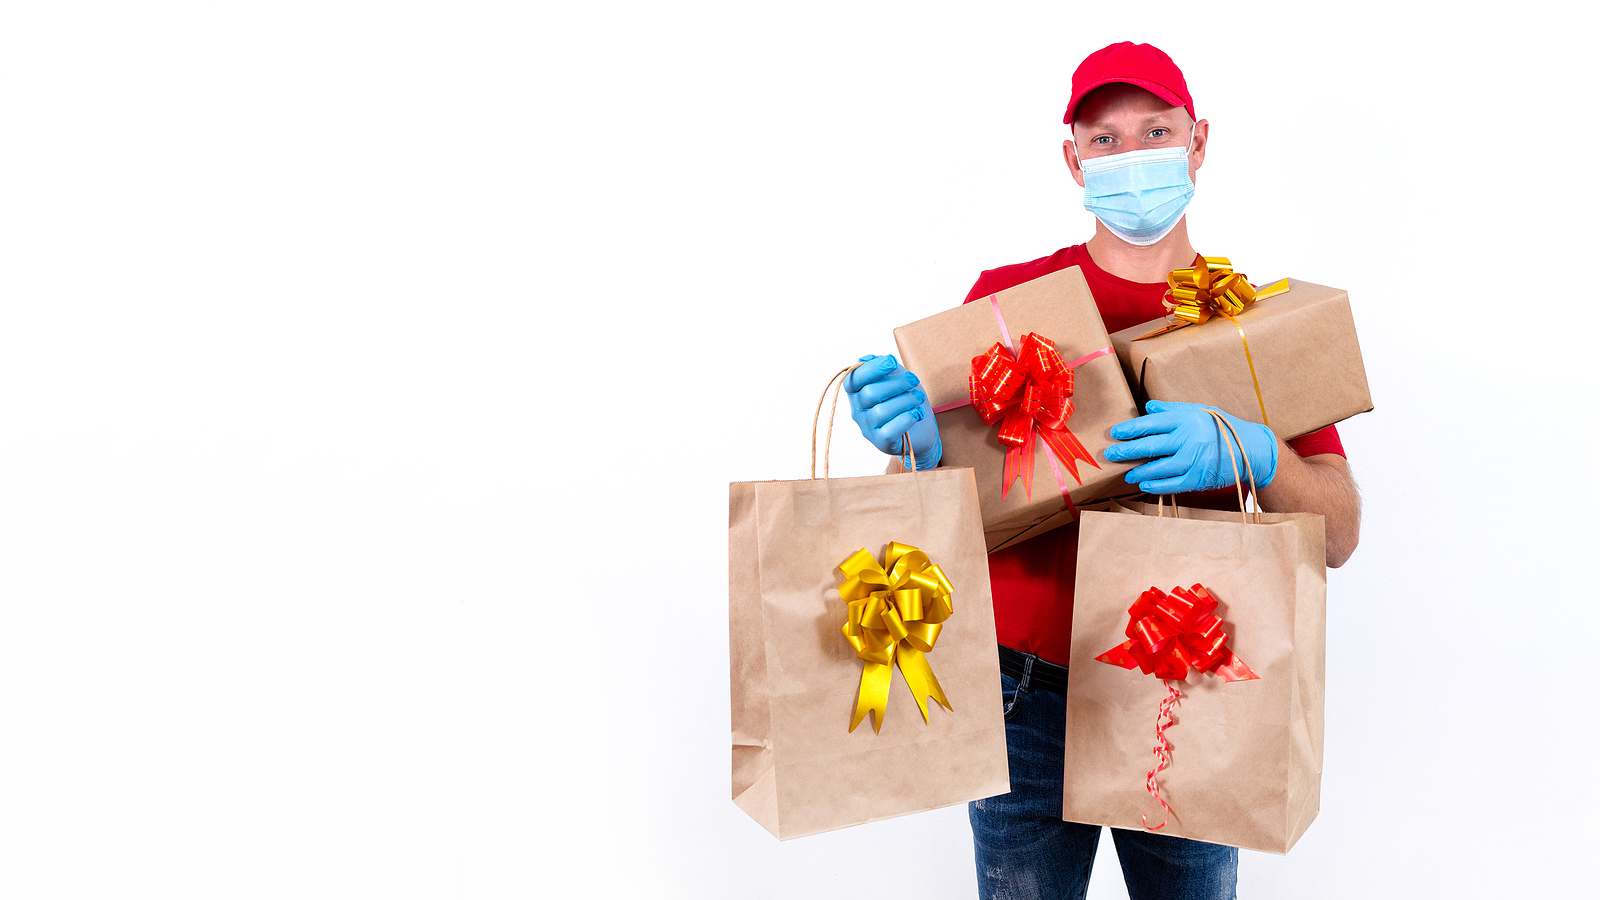 Safe contactless remote delivery of holiday gifts during coronavirus pandemic. A courier in red uniform and protective medical mask and gloves holds large order, many gift boxes and bags with bows